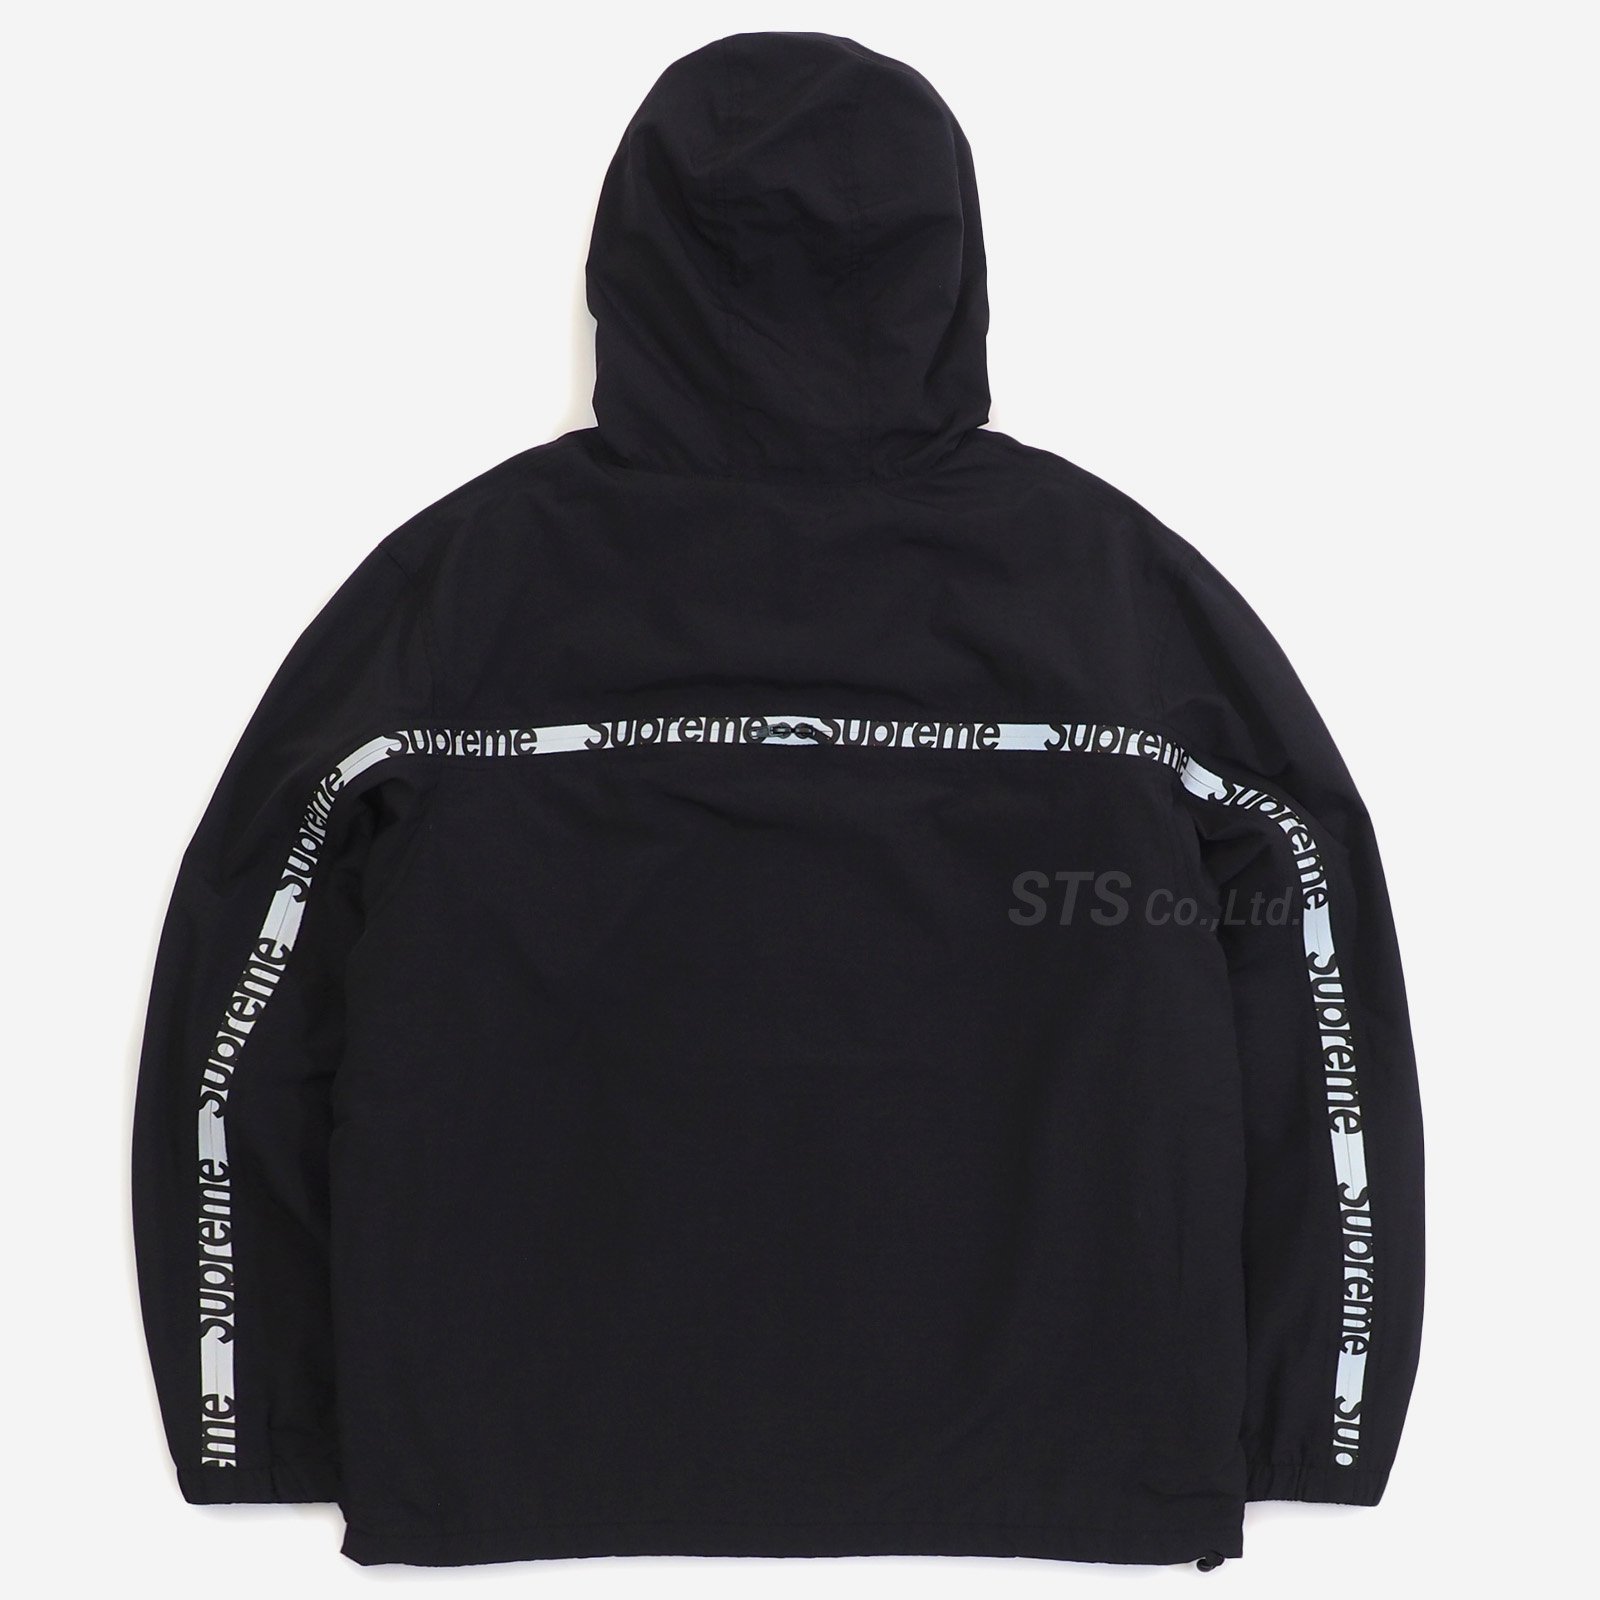 07042● SUPREME Reflective Taping Hooded